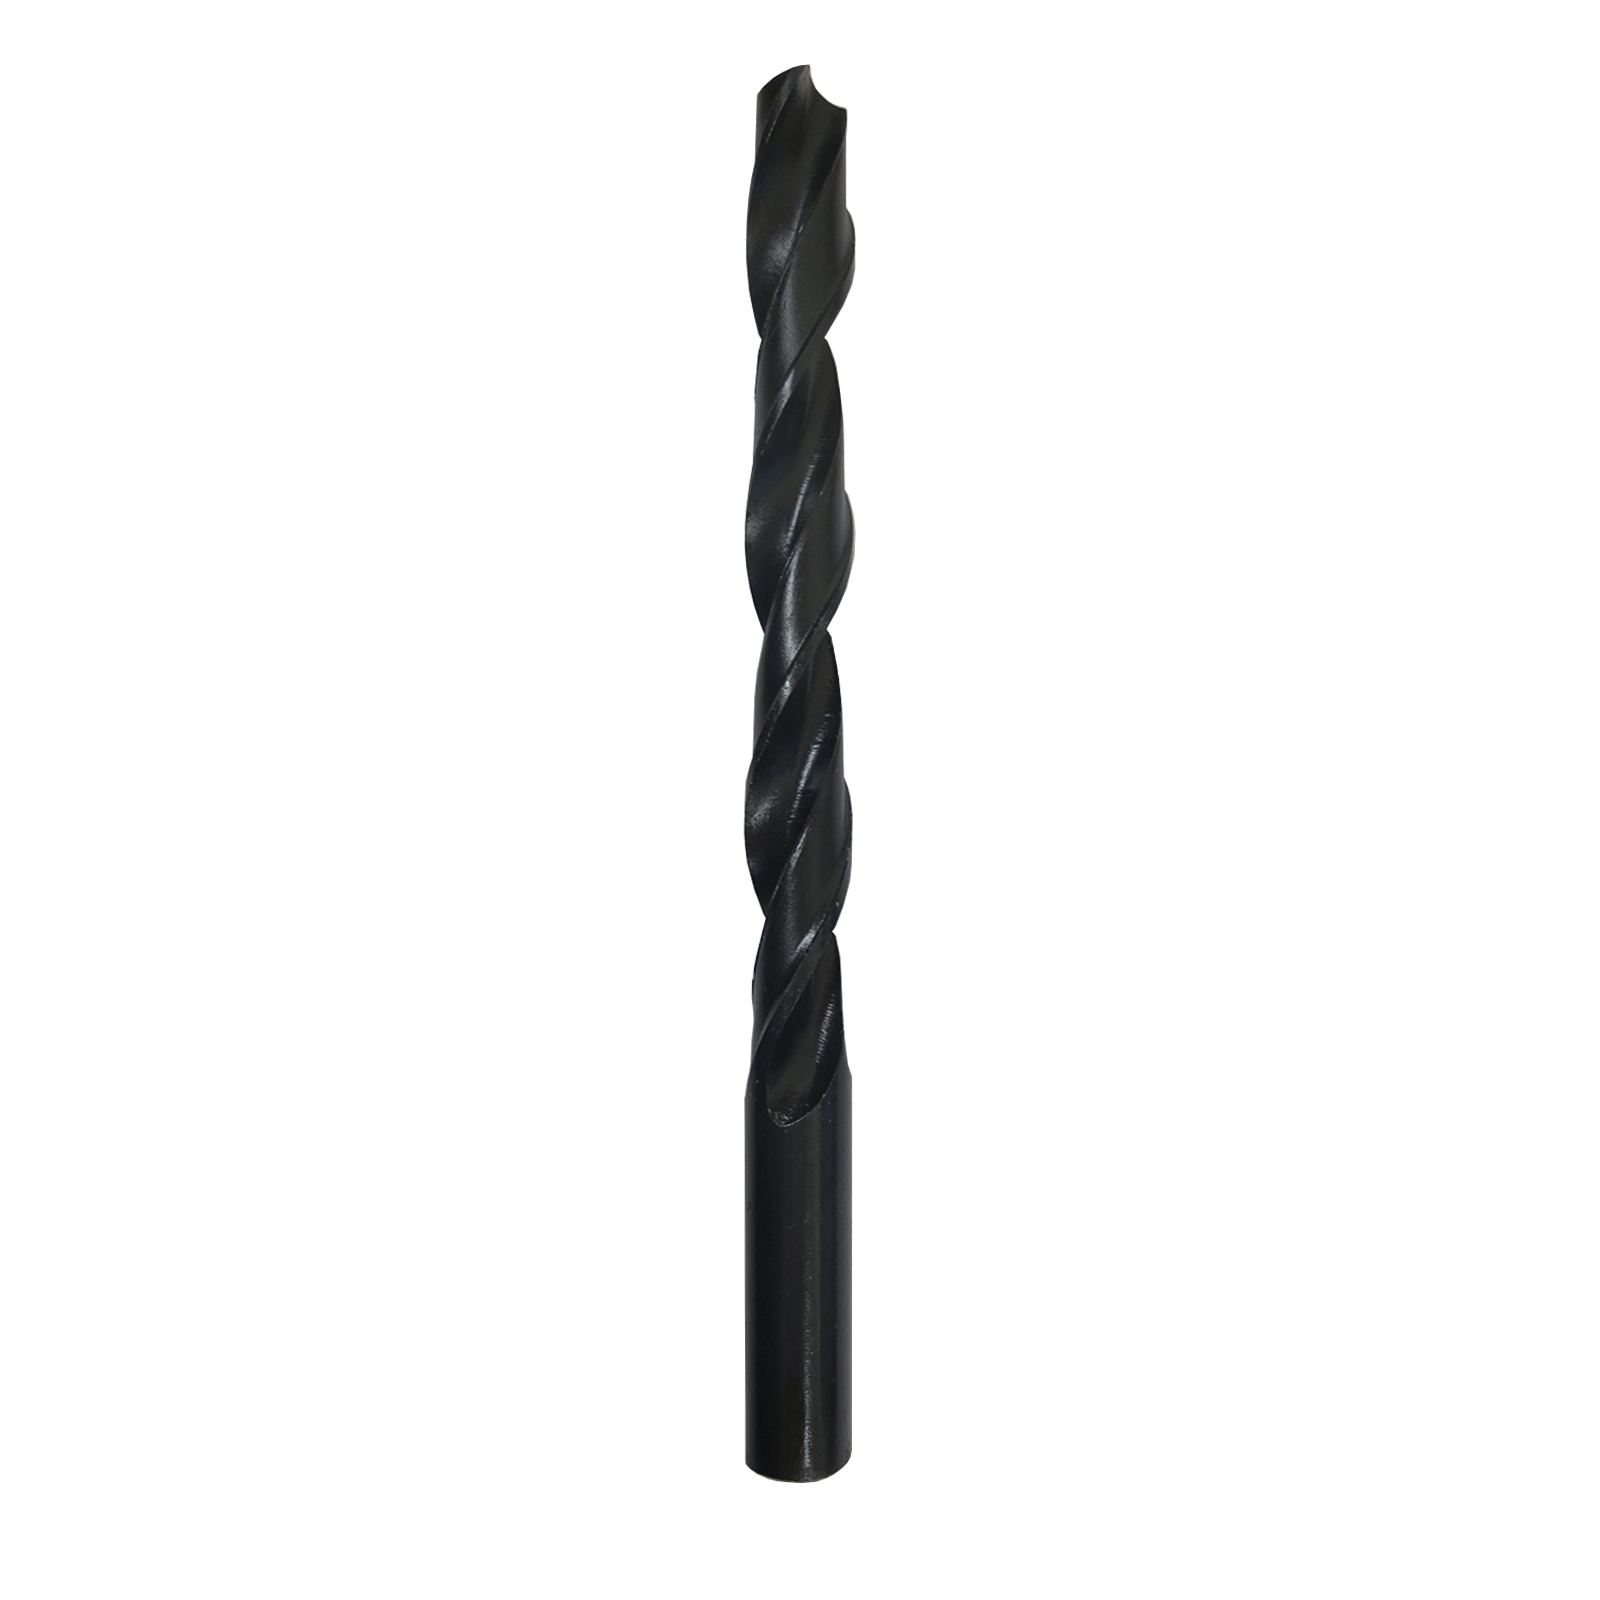 Gyros 45-42081 Premium (Made in US) Industrial Grade HSS Black Oxide Metric Drill Bit, 6.3 mm, Pack of 12